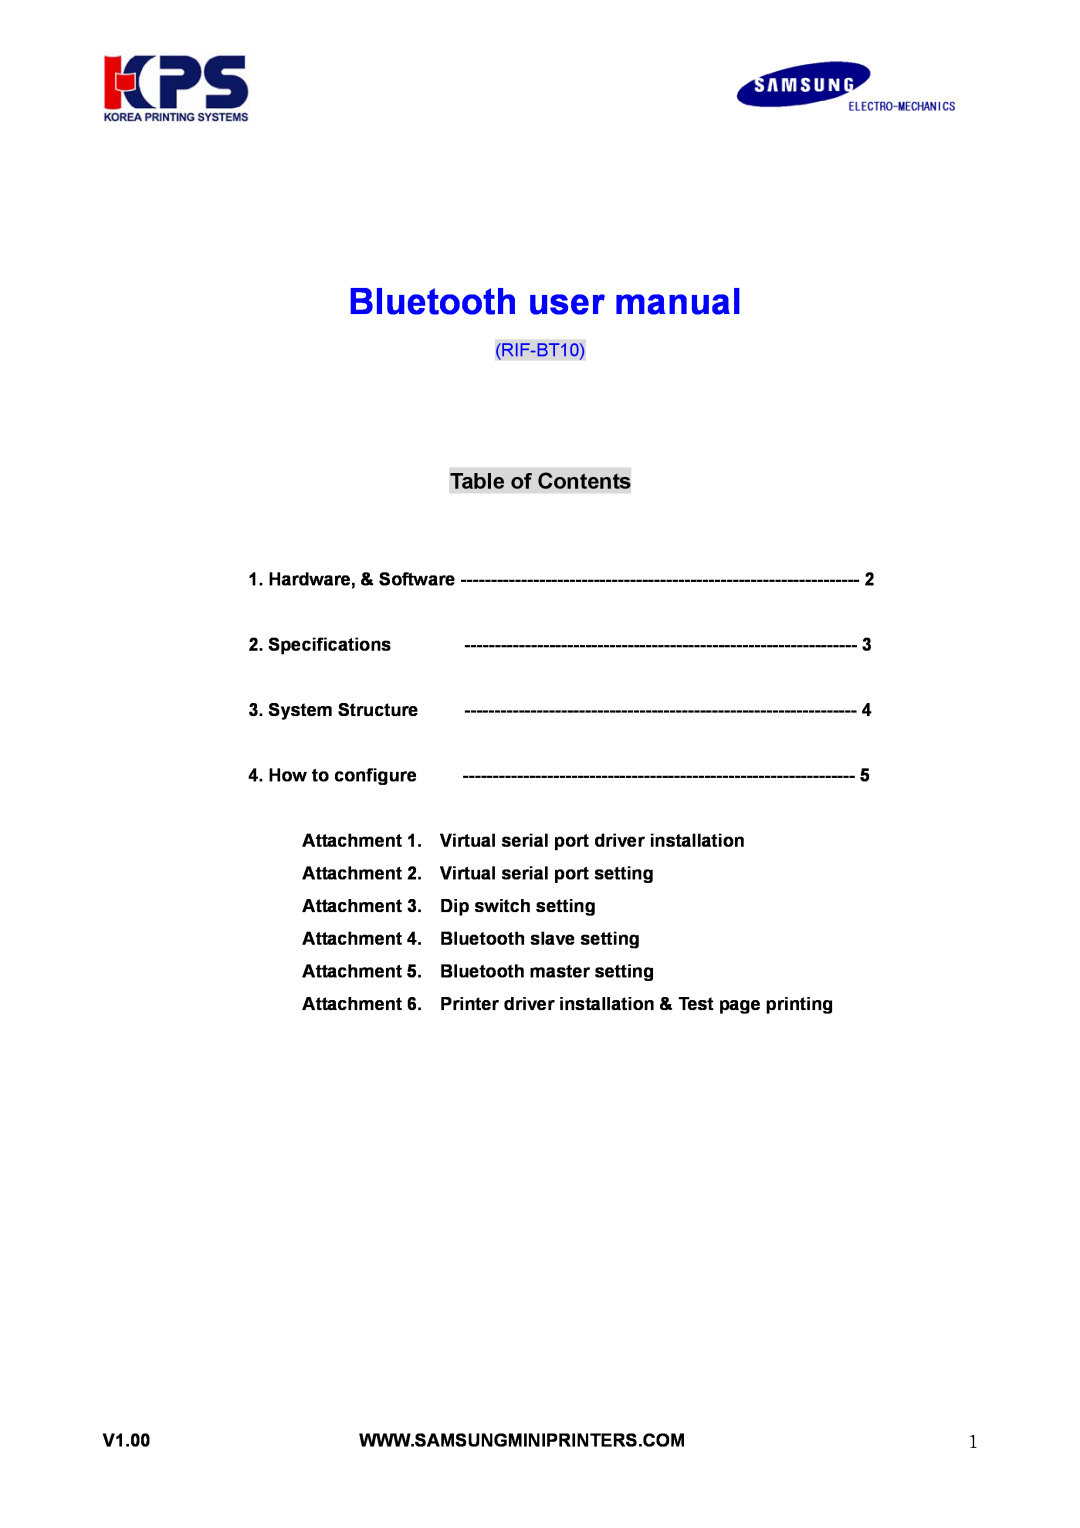 Samsung RIF-BT10 user manual Bluetooth user manual, Table of Contents 